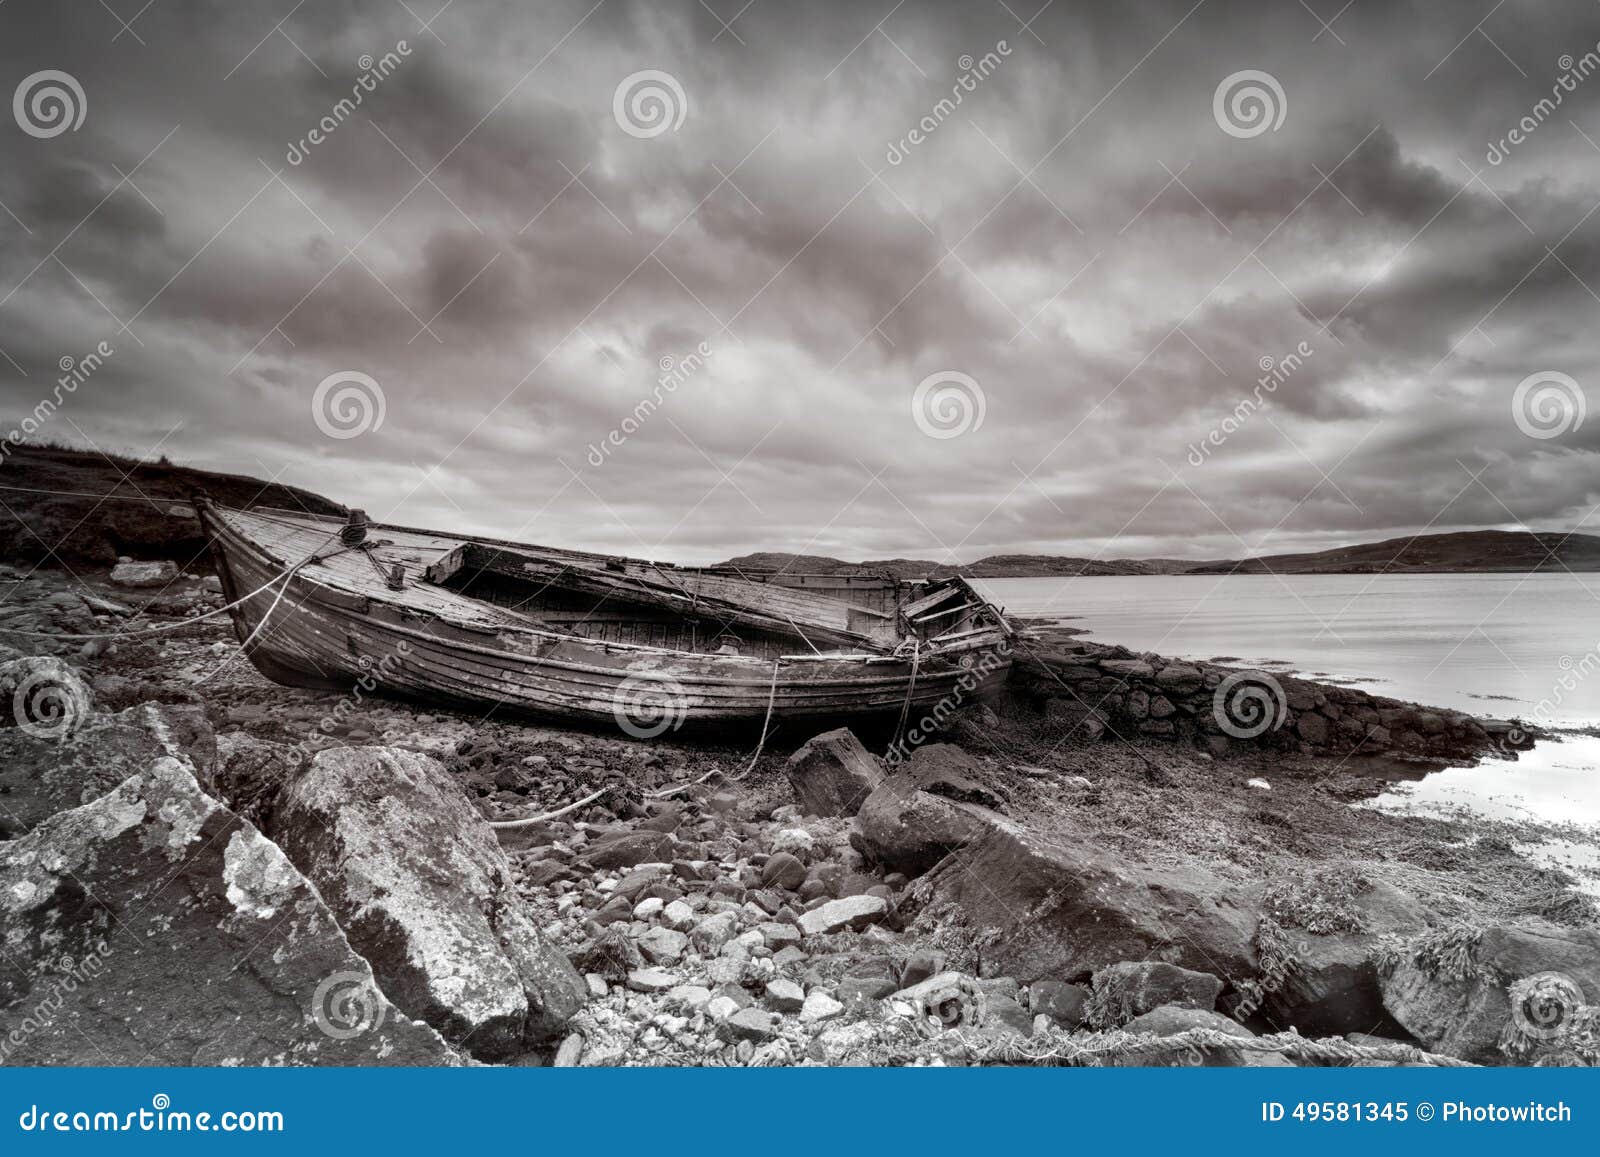 Weathered fishing boat lying on a rocky beach on the Isle of Lewis ...